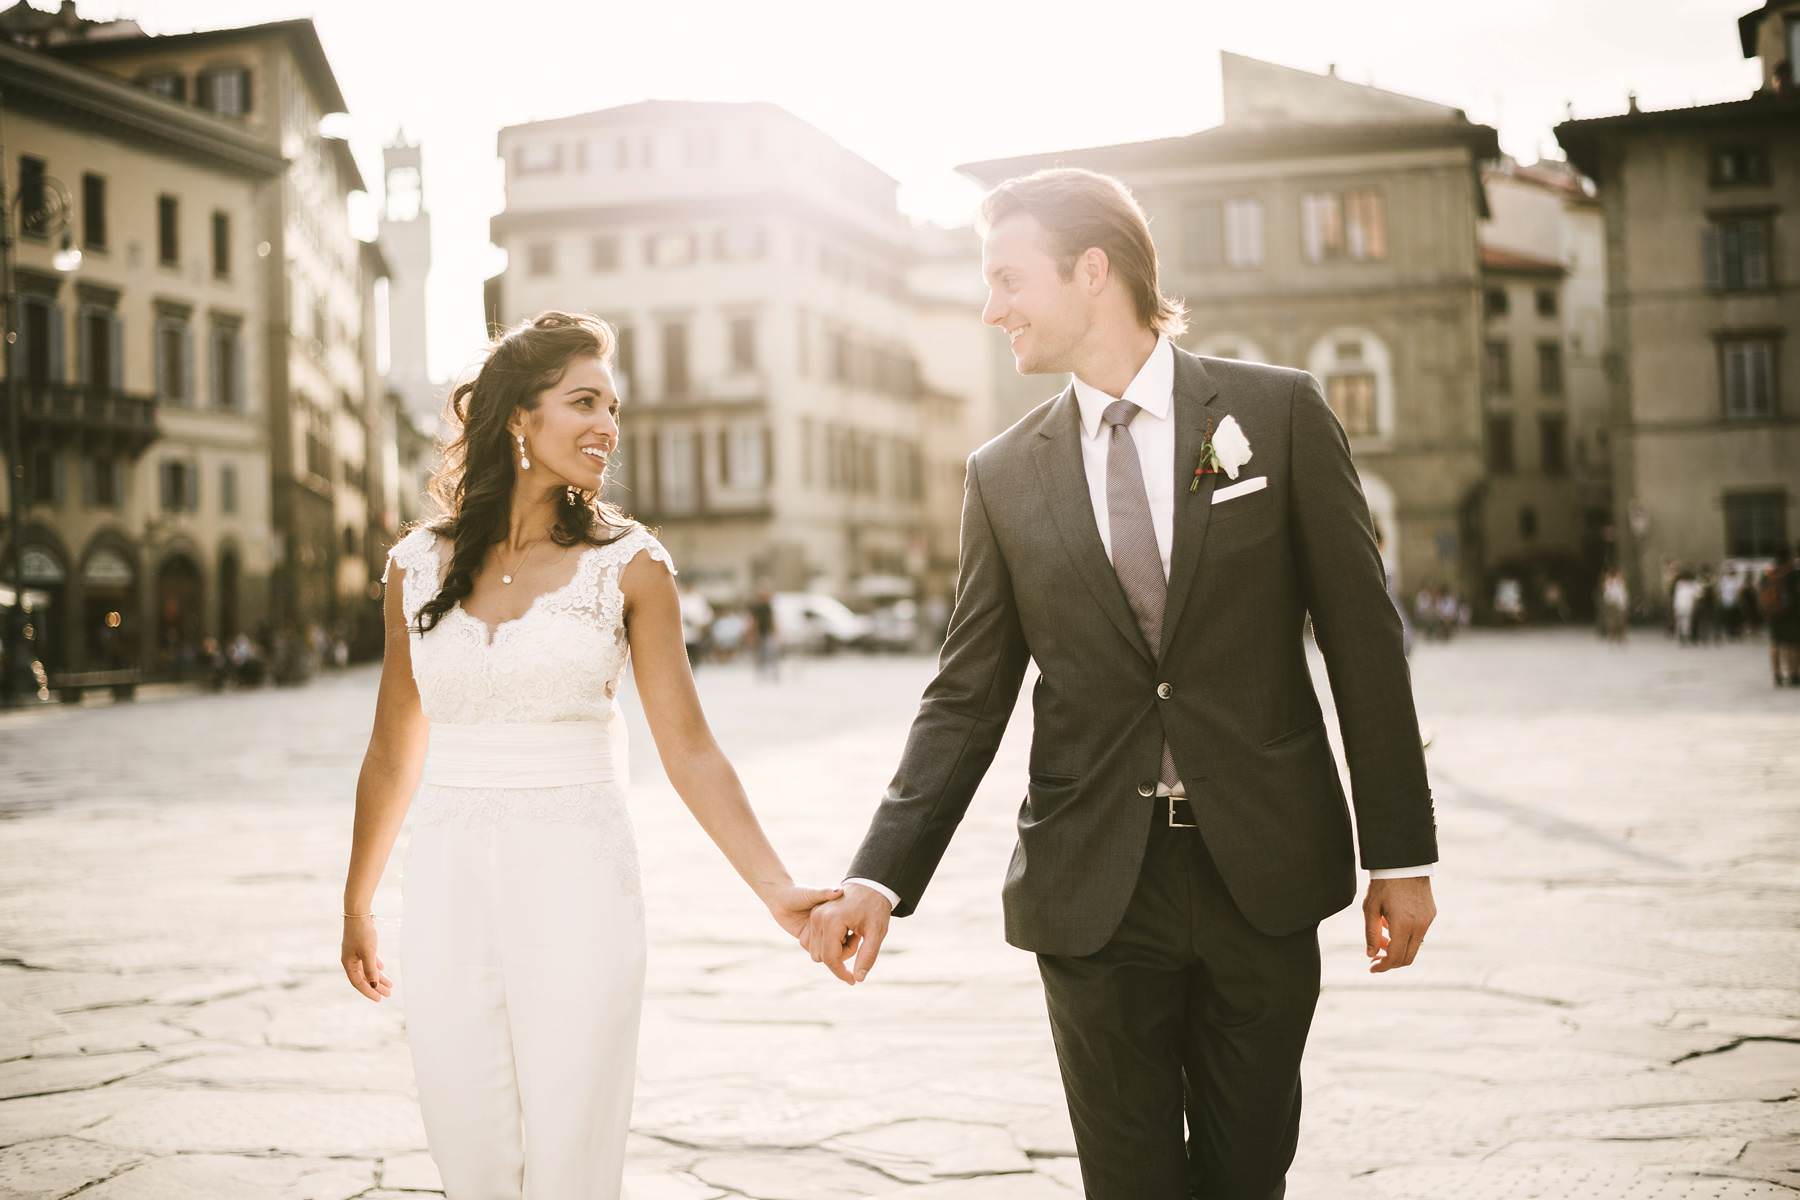 Exclusive wedding ideas: say Yes overlooking the best view of Florence